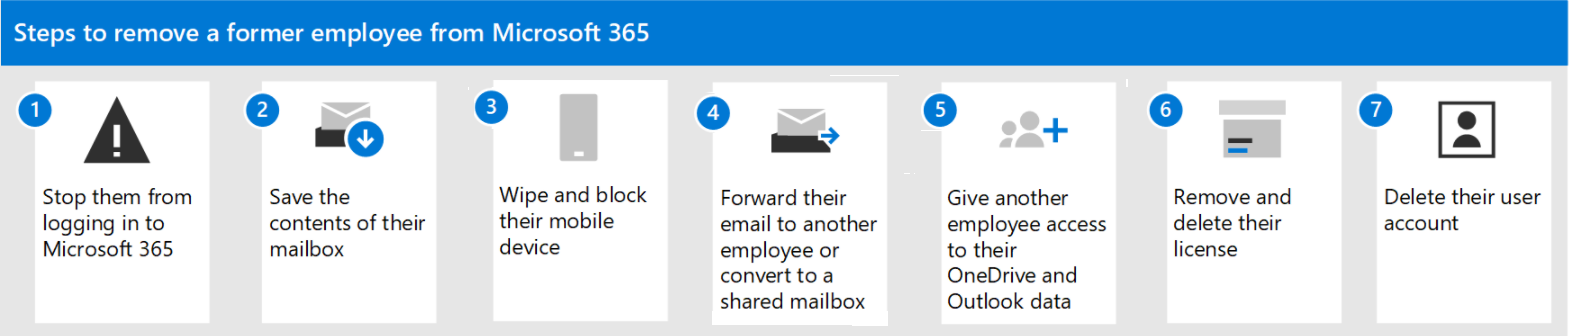 How to delete former employees` Microsoft 365 accounts and properly preserve their mailbox data